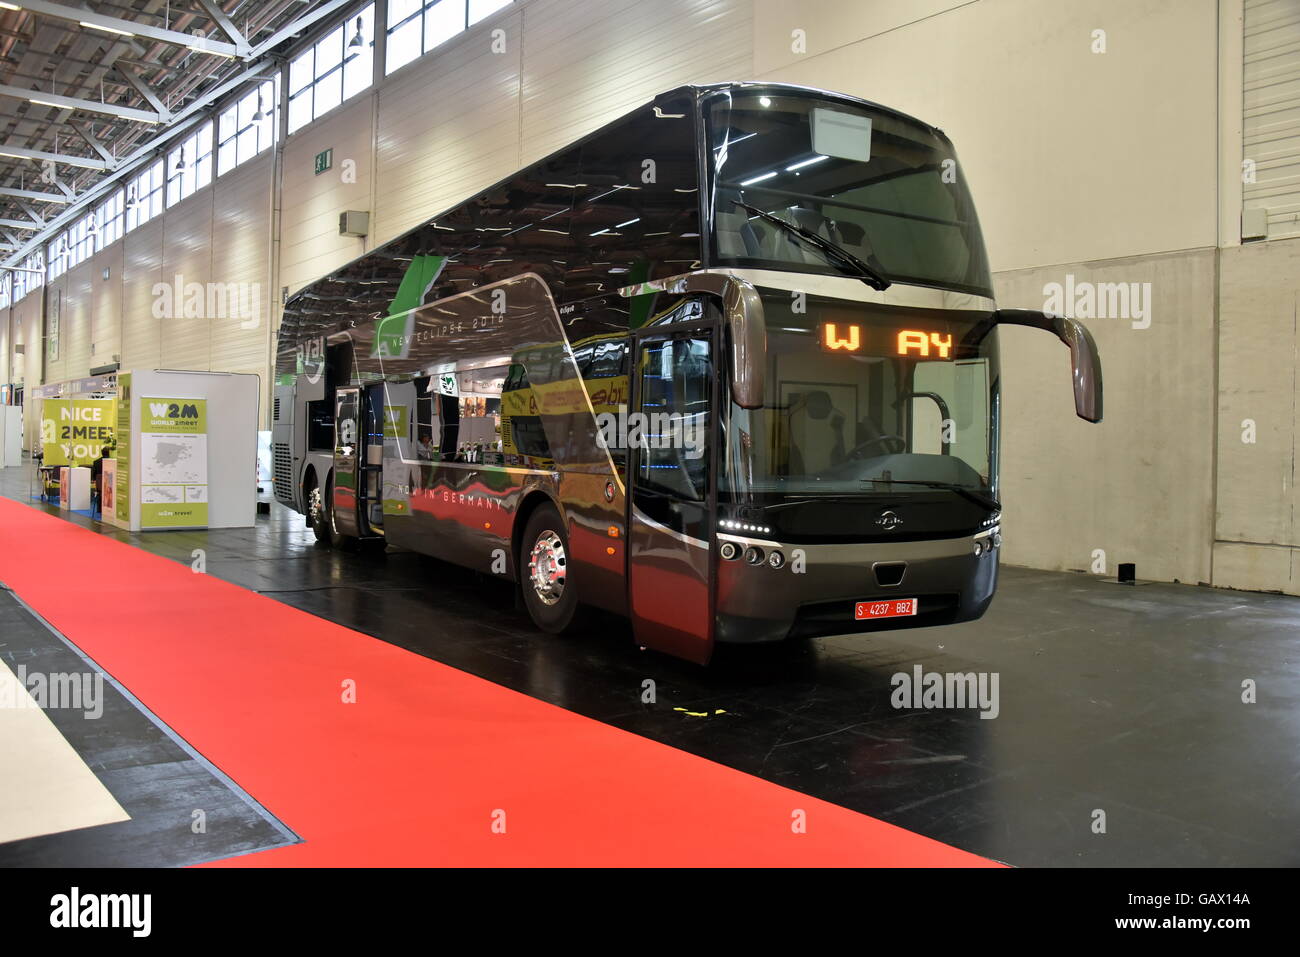 Cologne, Germany. 5th July, 2016. The Ayats Eclipse coach by Spanish coach manufacturer Carrocerias Ayats SA stands at the RDA Workshop, the internationally leading fair for coach travel and group tours, in Cologne, Germany, 5 July 2016. Photo: Horst Galuschka/dpa - NO WIRE SERVICE -/dpa/Alamy Live News Stock Photo